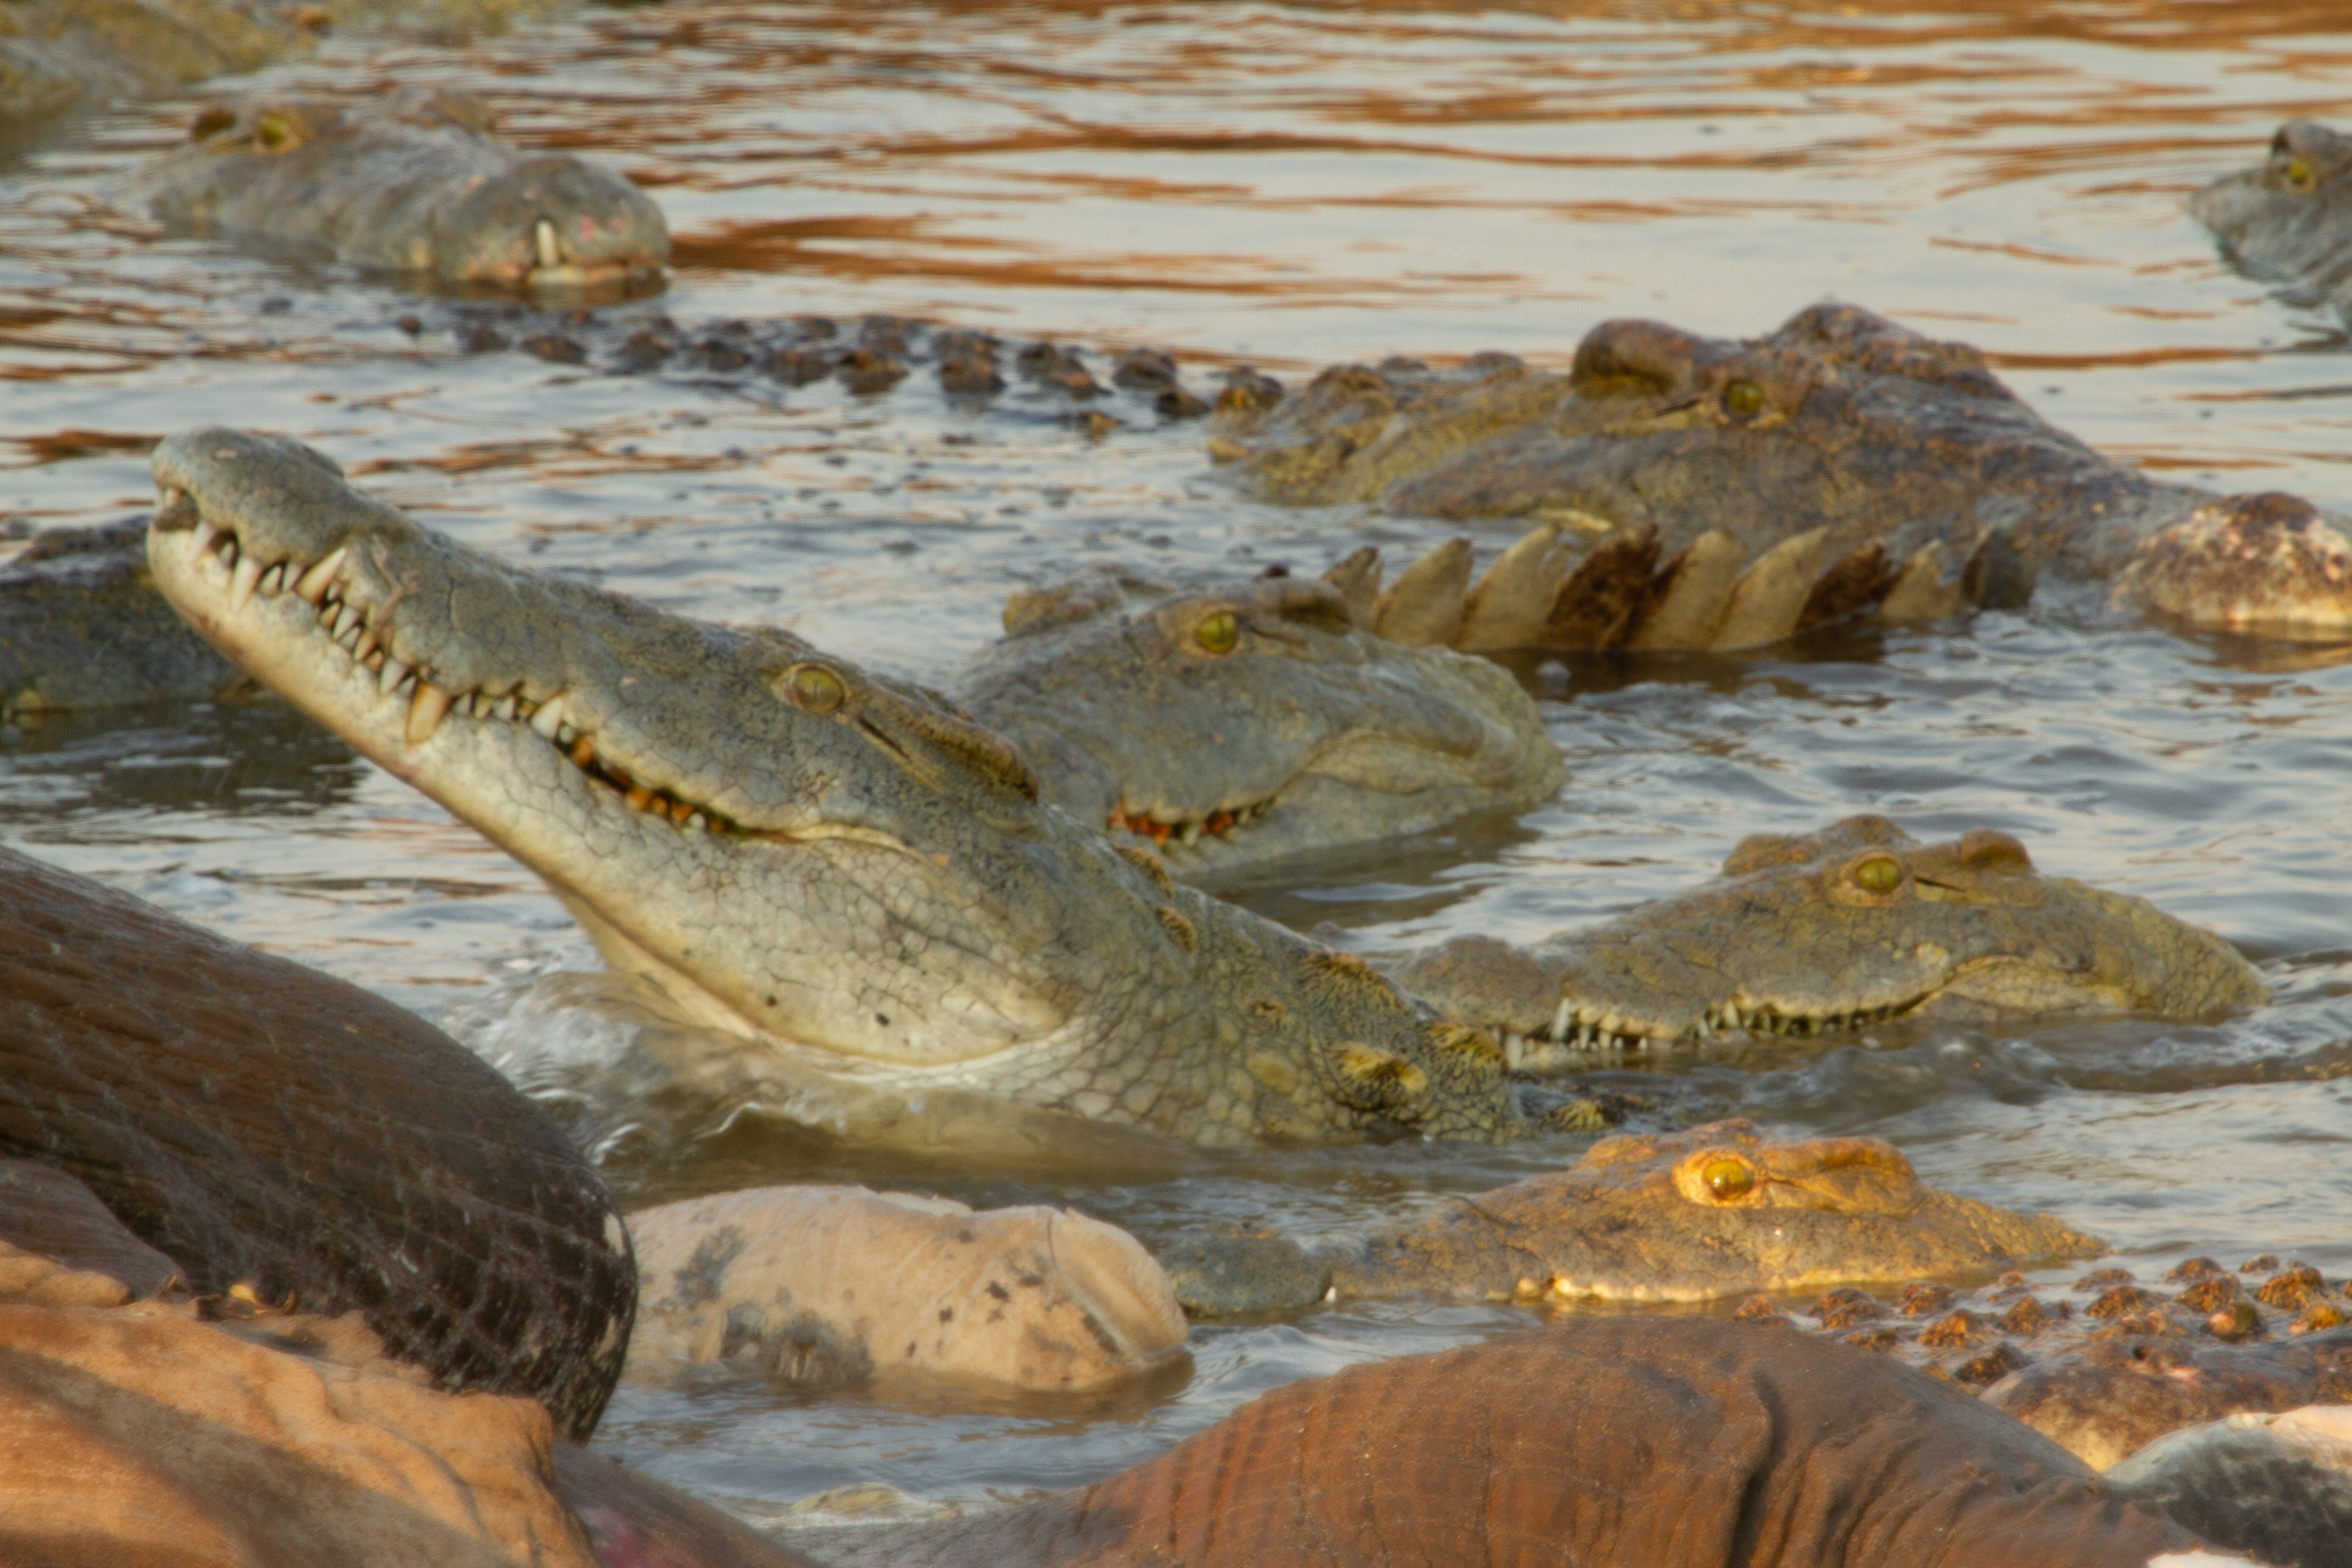 Many crocs around elephant carcass. This is from Crocodiles revealed. [Photo of the day - October 2022]